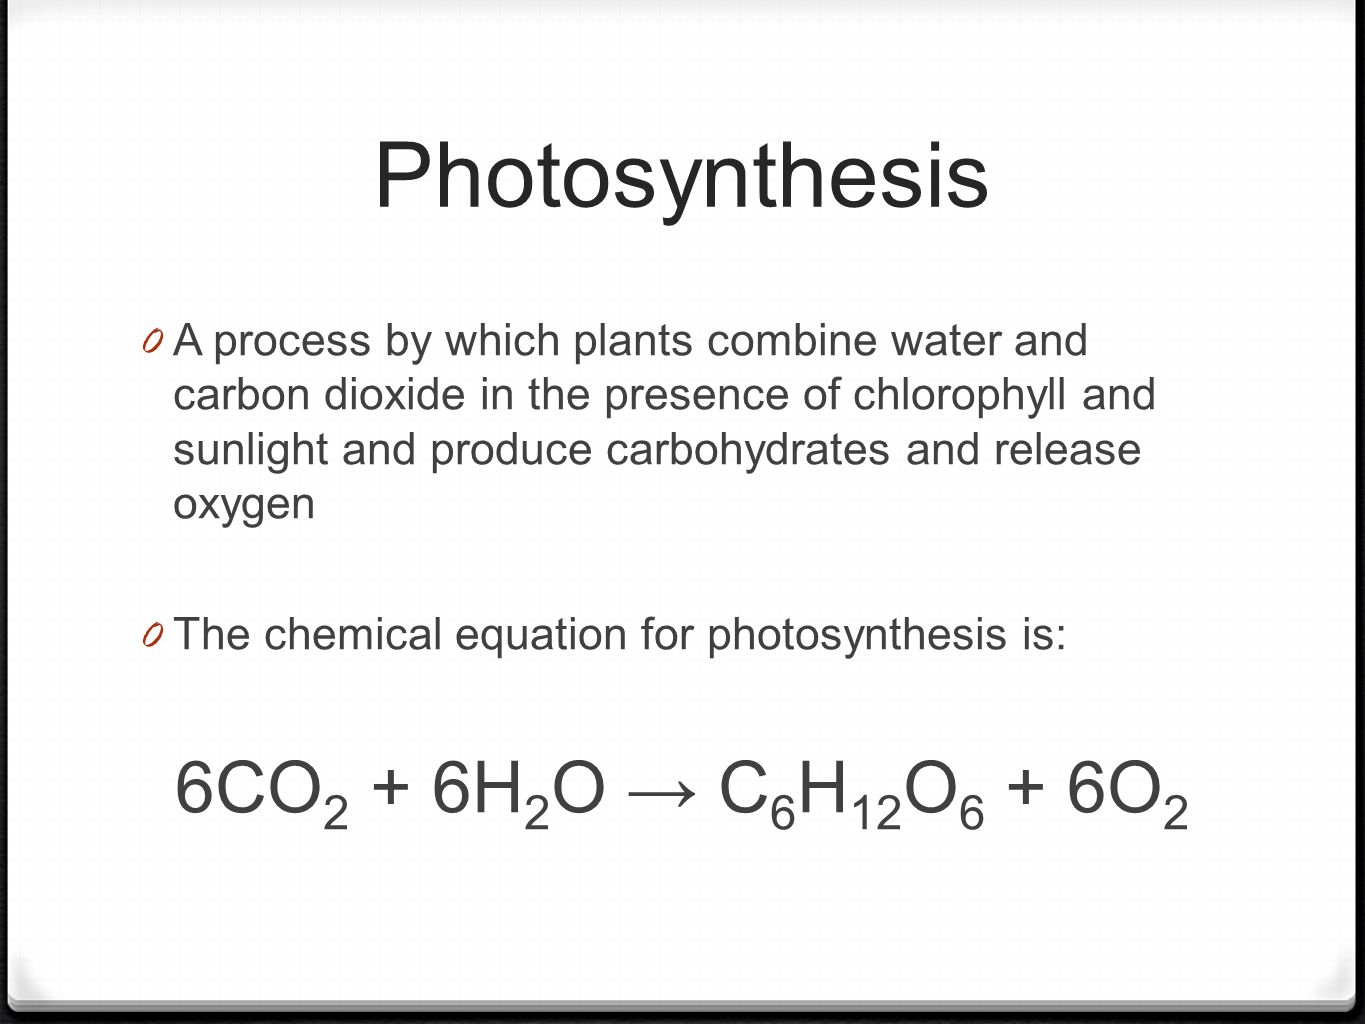 Photosynthesis 0 A process by which plants combine water and carbon dioxide in the presence of chlorophyll and sunlight and produce carbohydrates and release oxygen 0 The chemical equation for photosynthesis is: 6CO 2 + 6H 2 O → C 6 H 12 O 6 + 6O 2